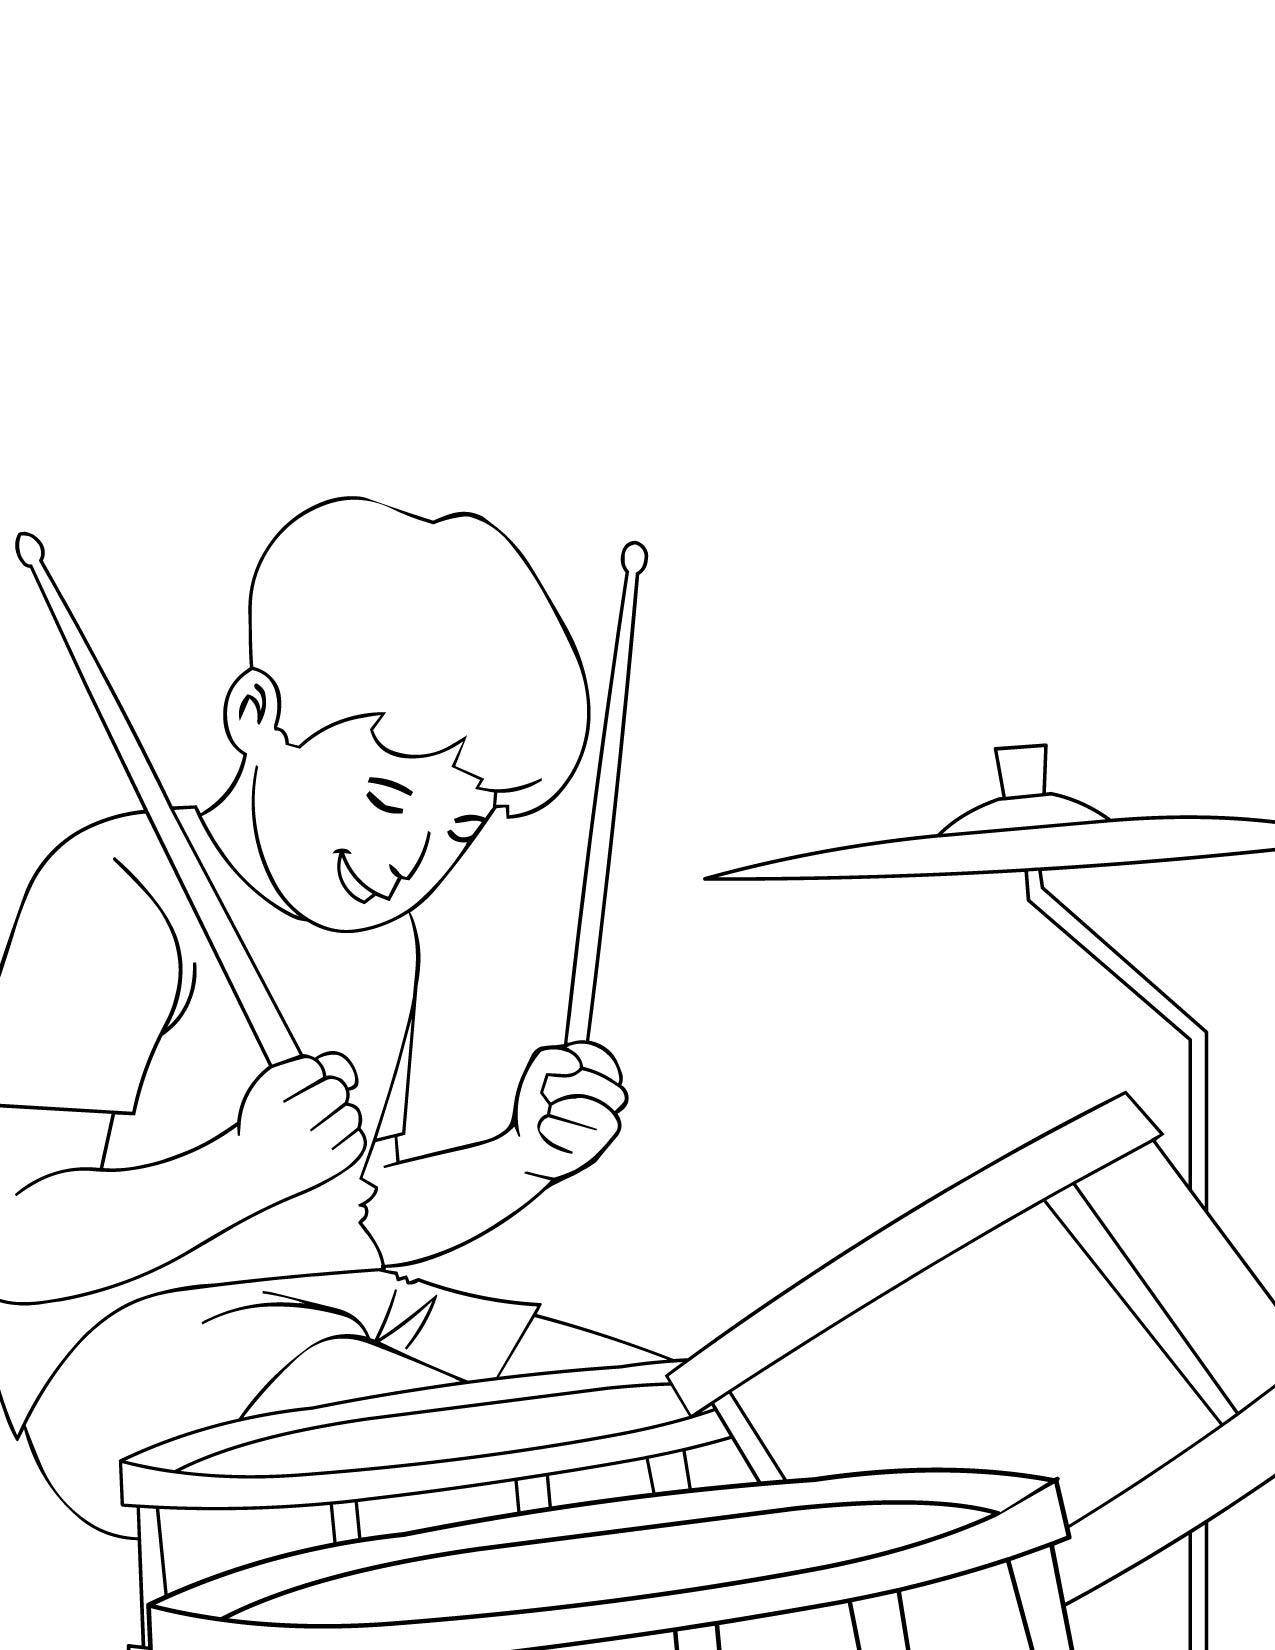 Coloring Young drummer. Category Music. Tags:  Music, instrument, musician, note.